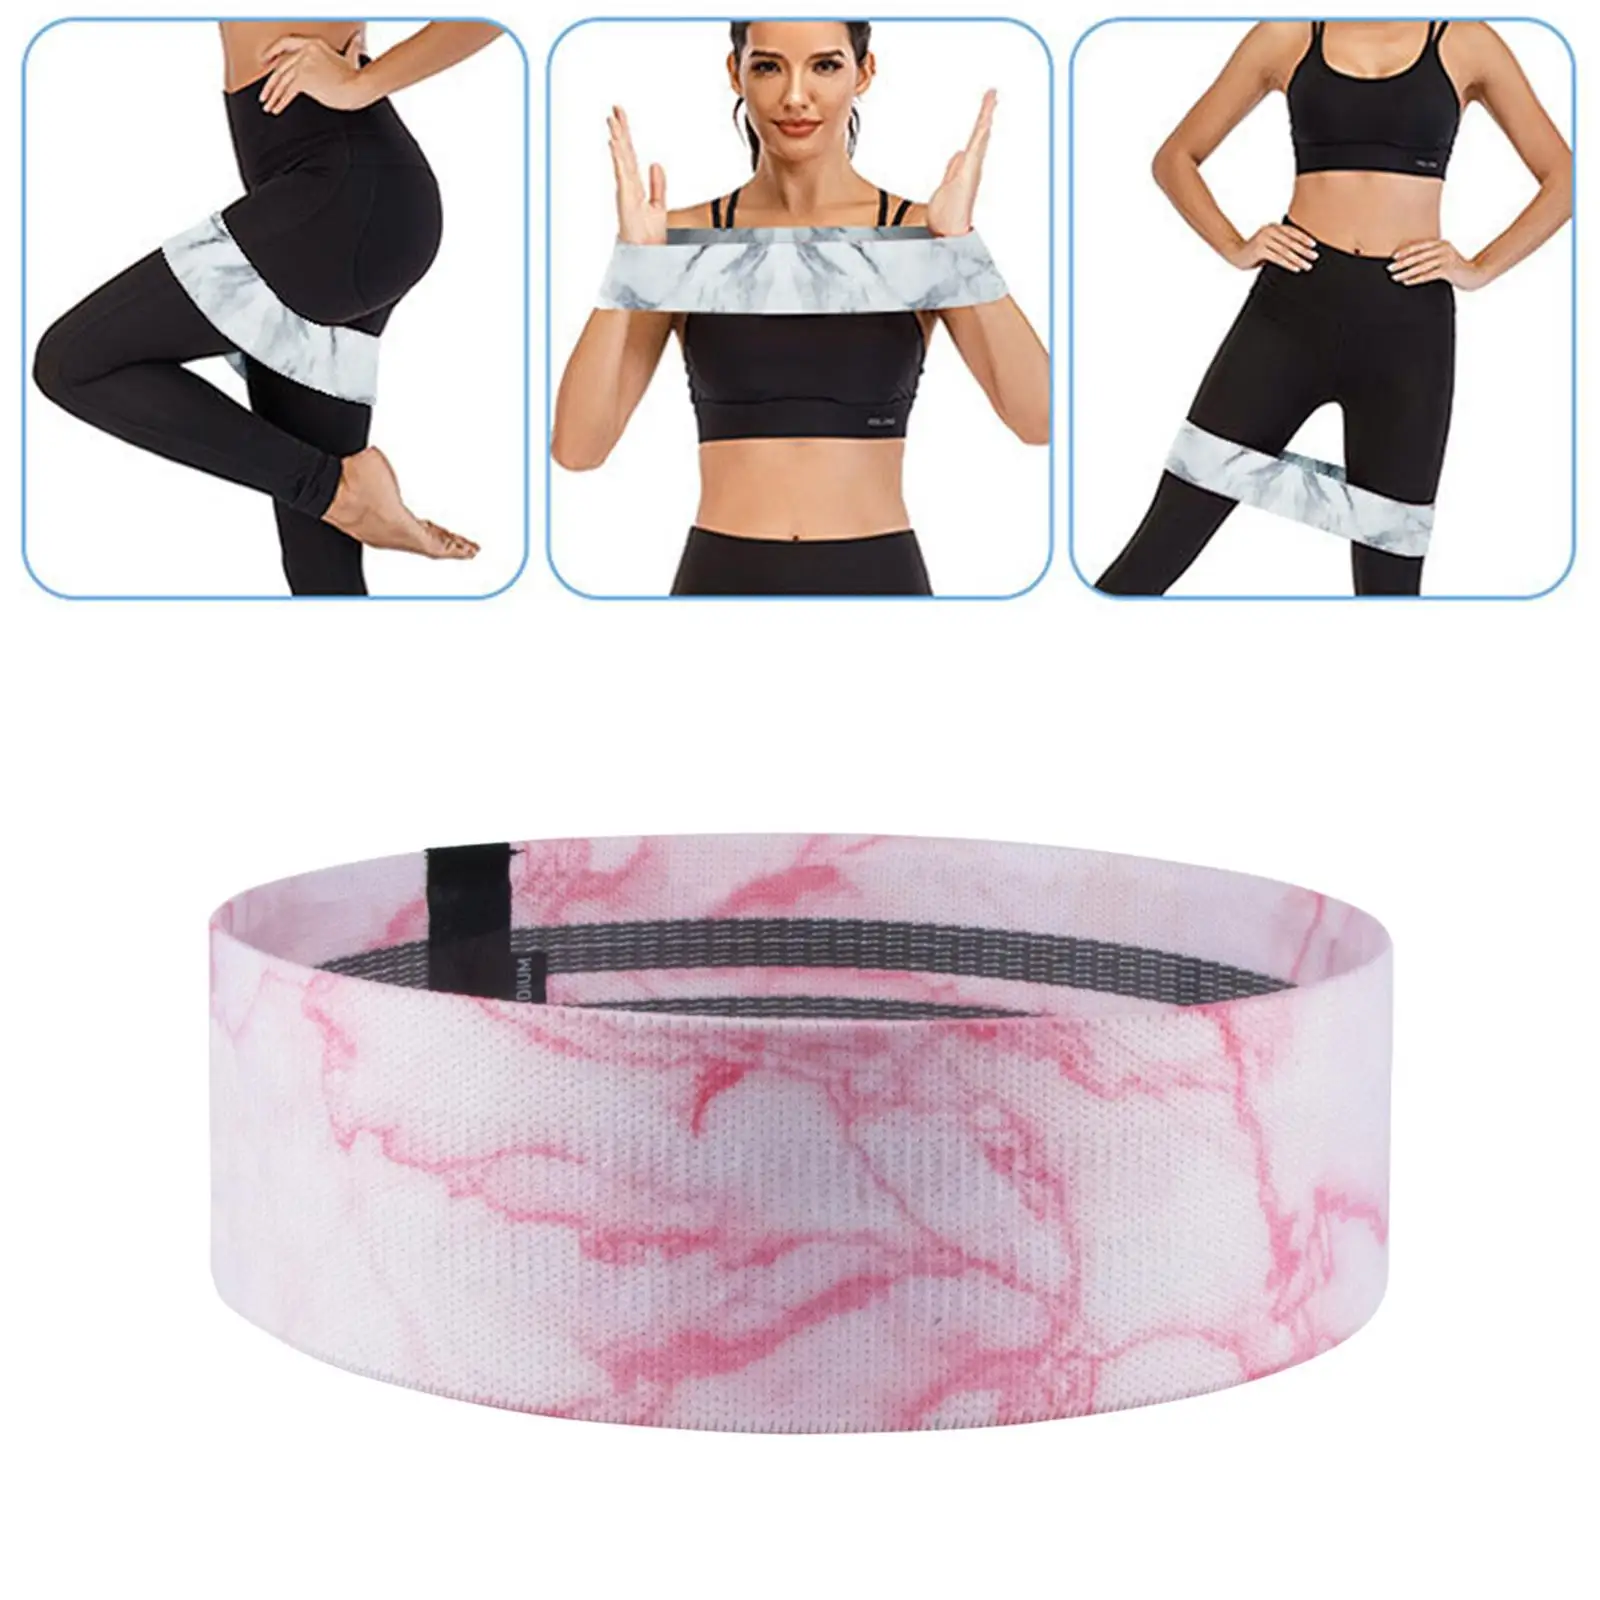 Resistance Bands Exercise Bands Non Slip Squat Bands Elastic Strength Bands for Legs and Butt Exercise Fitness Training Home Gym